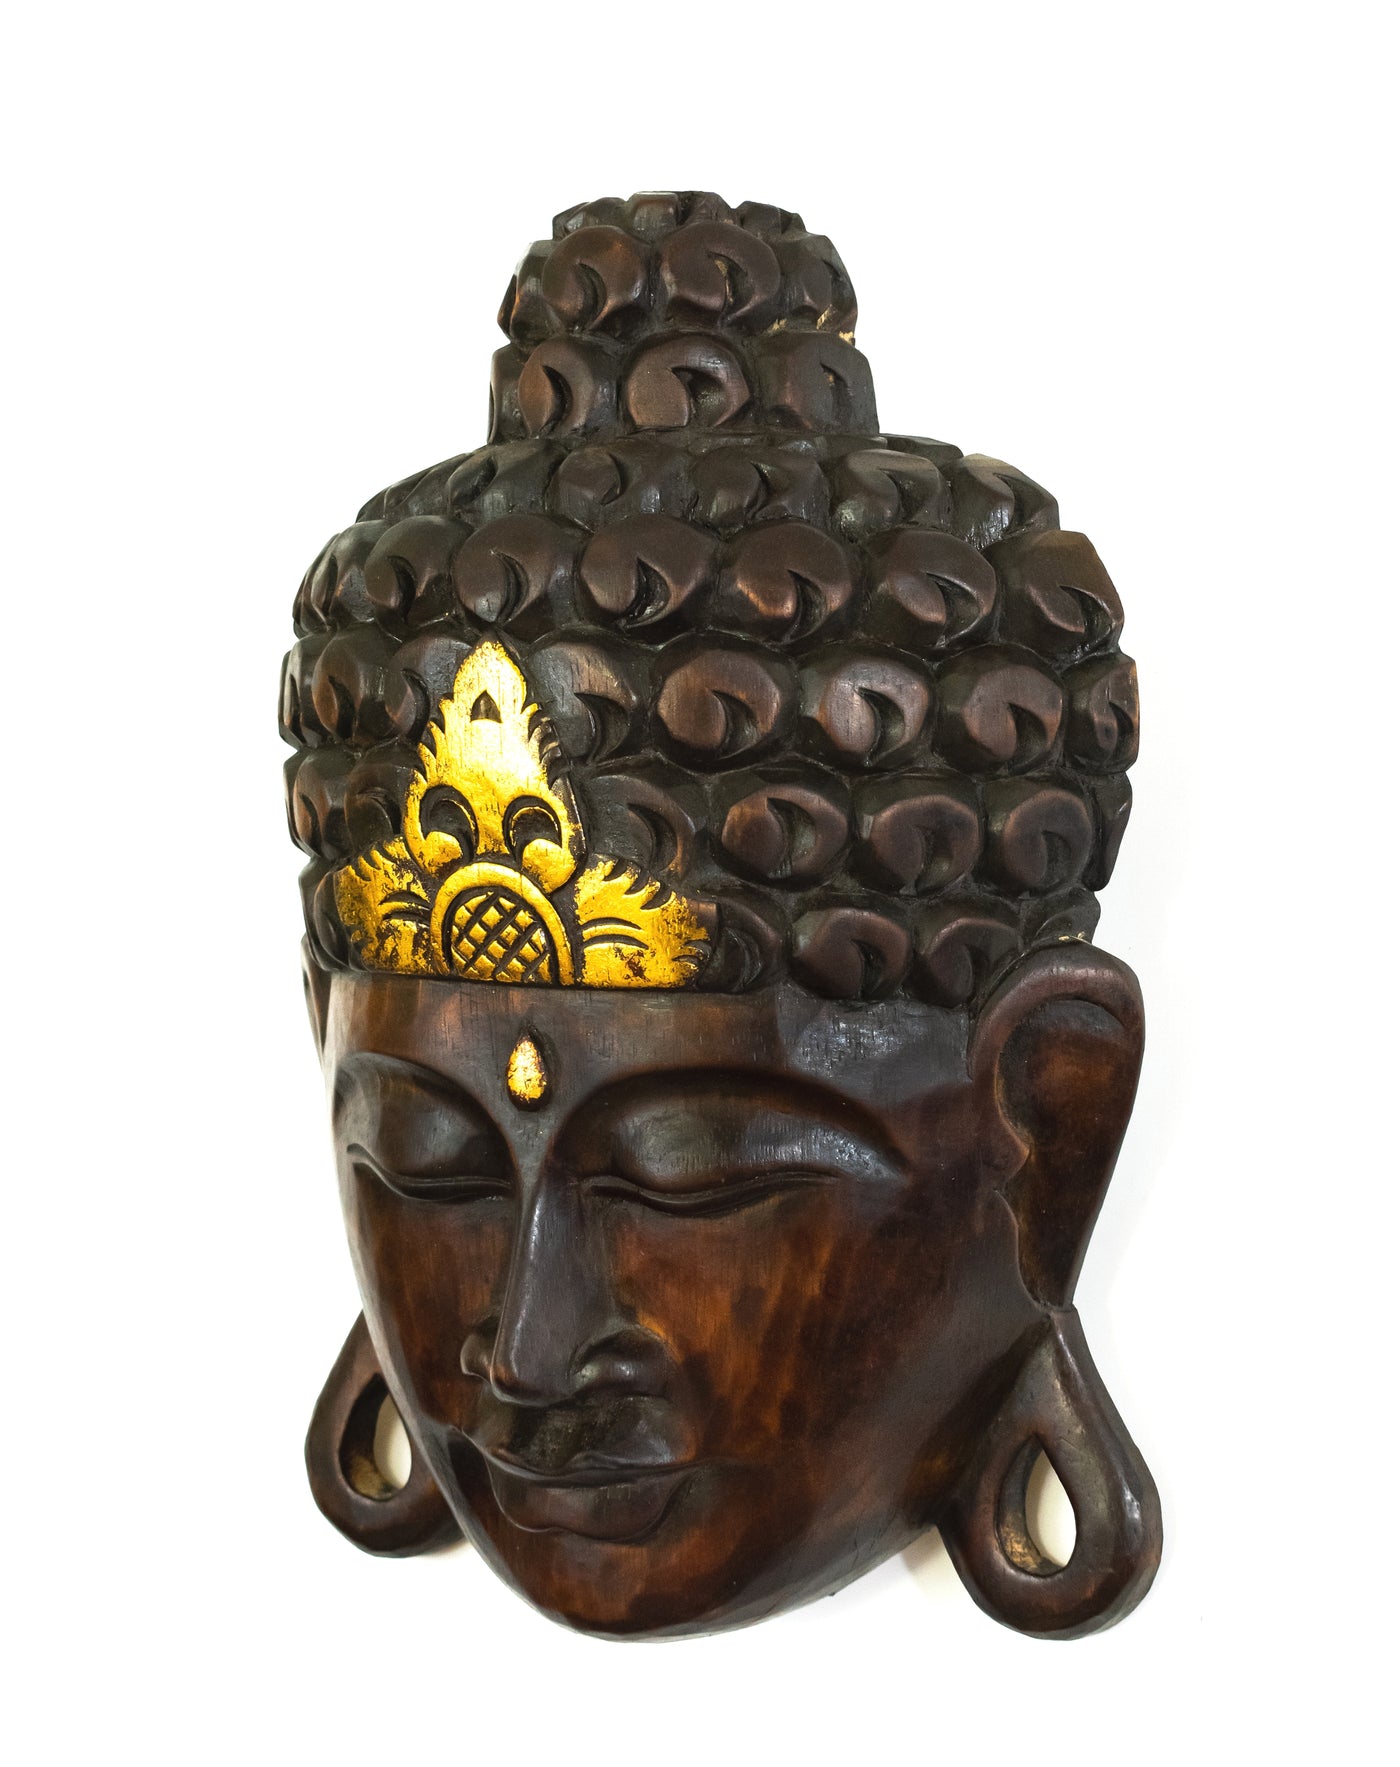 Wooden Wall Mask Serene Buddha Head Statue Hand Carved Sculpture Handmade Figurine Gift Home Decor Accent Handcrafted Wall Hanging Decoration